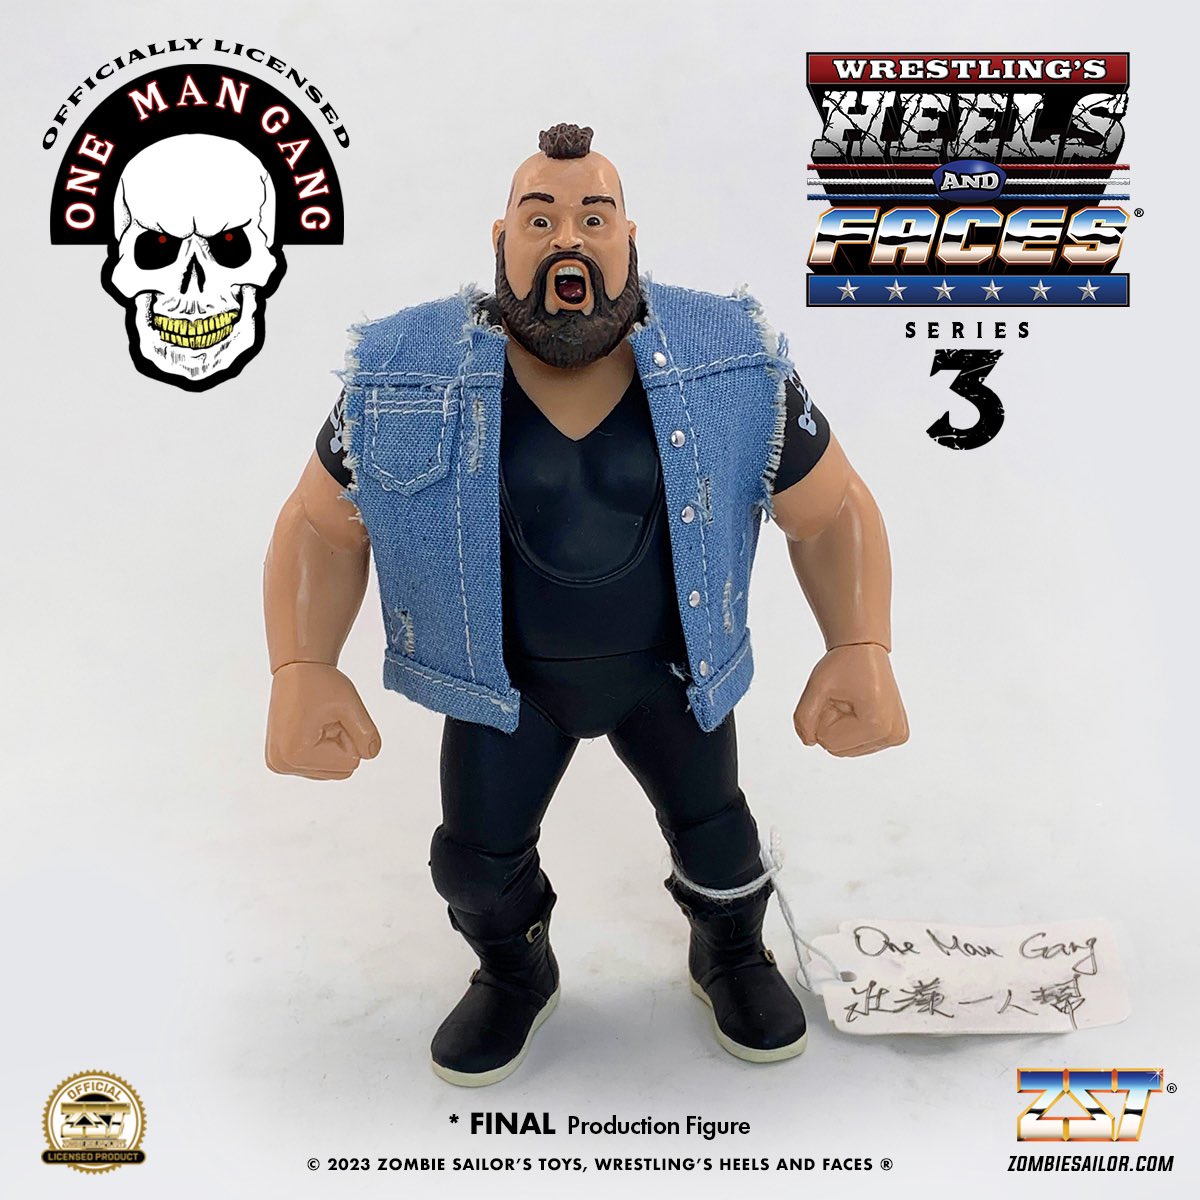 We are pleased to announce the headliner for H&F series 3

It’s the ONE MAN GANG!

Gang will be the headliner of S3

This is the ACTUAL FINISHED production figure!

We will continue to raise the bar 🔥

#onemangang #heelsandfaces